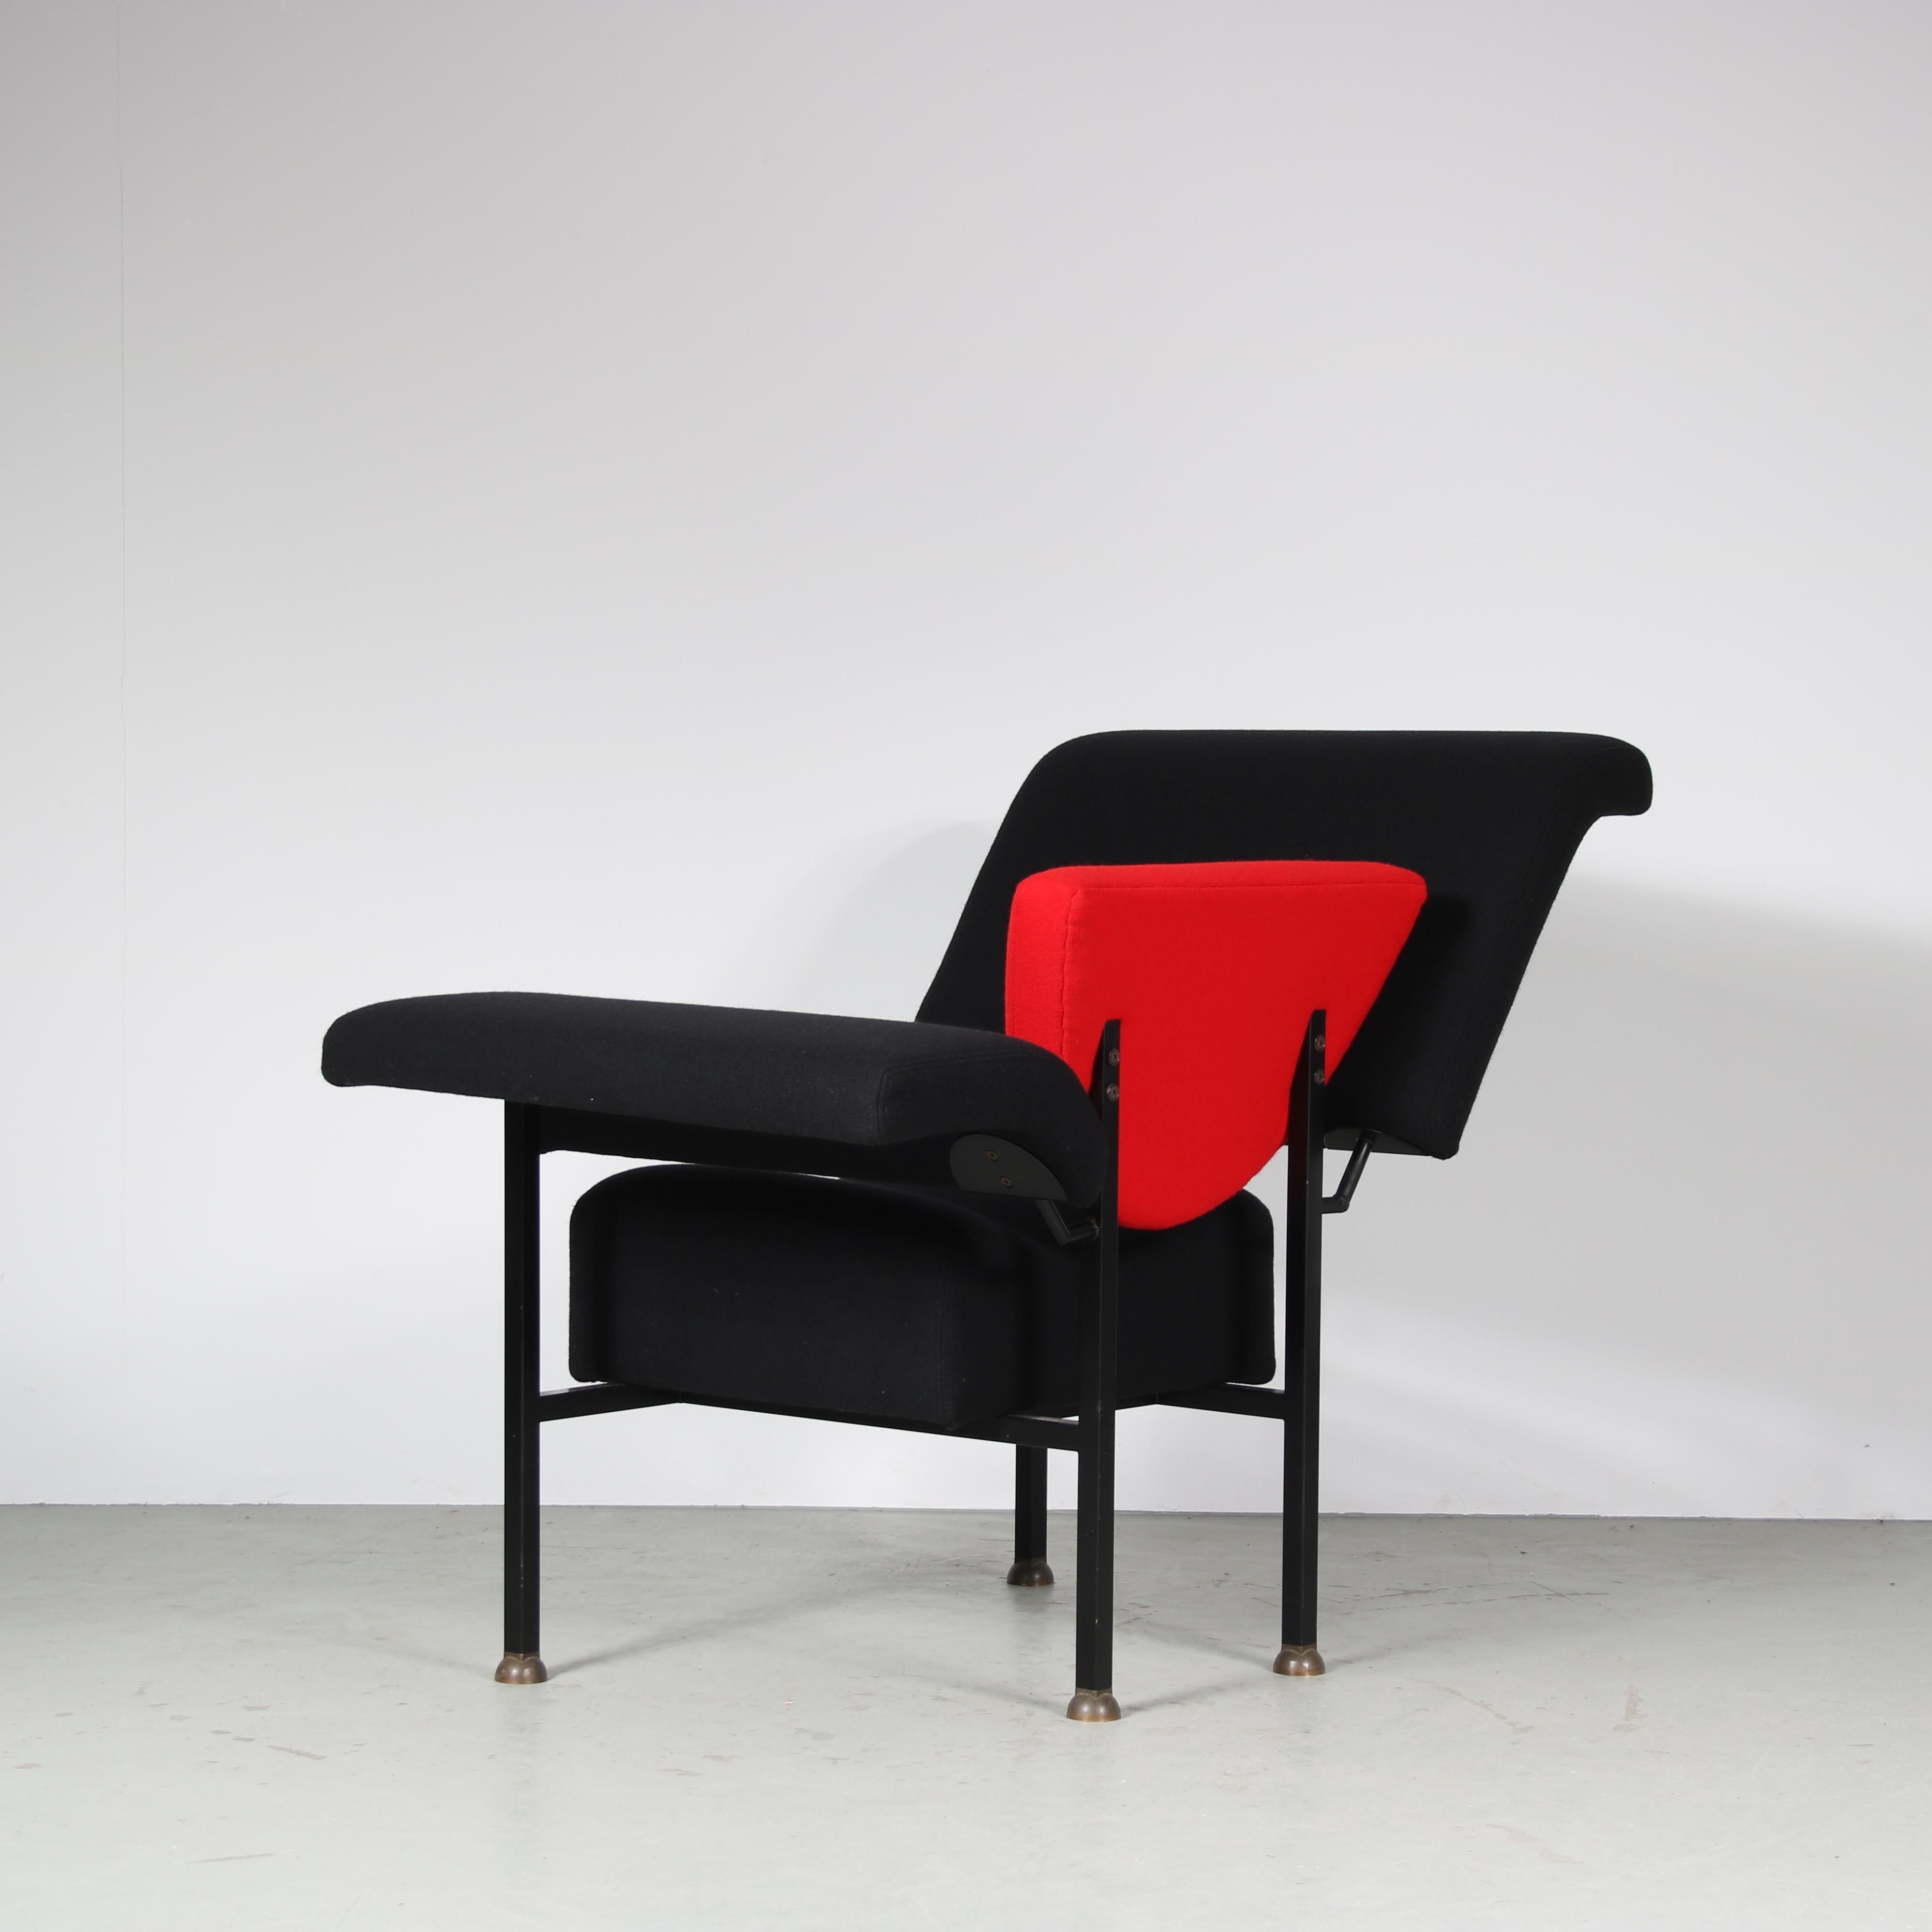 Late 20th Century “Groeten uit Holland” Chair by Rob Eckhardt for Pastoe, Netherlands 1980 For Sale